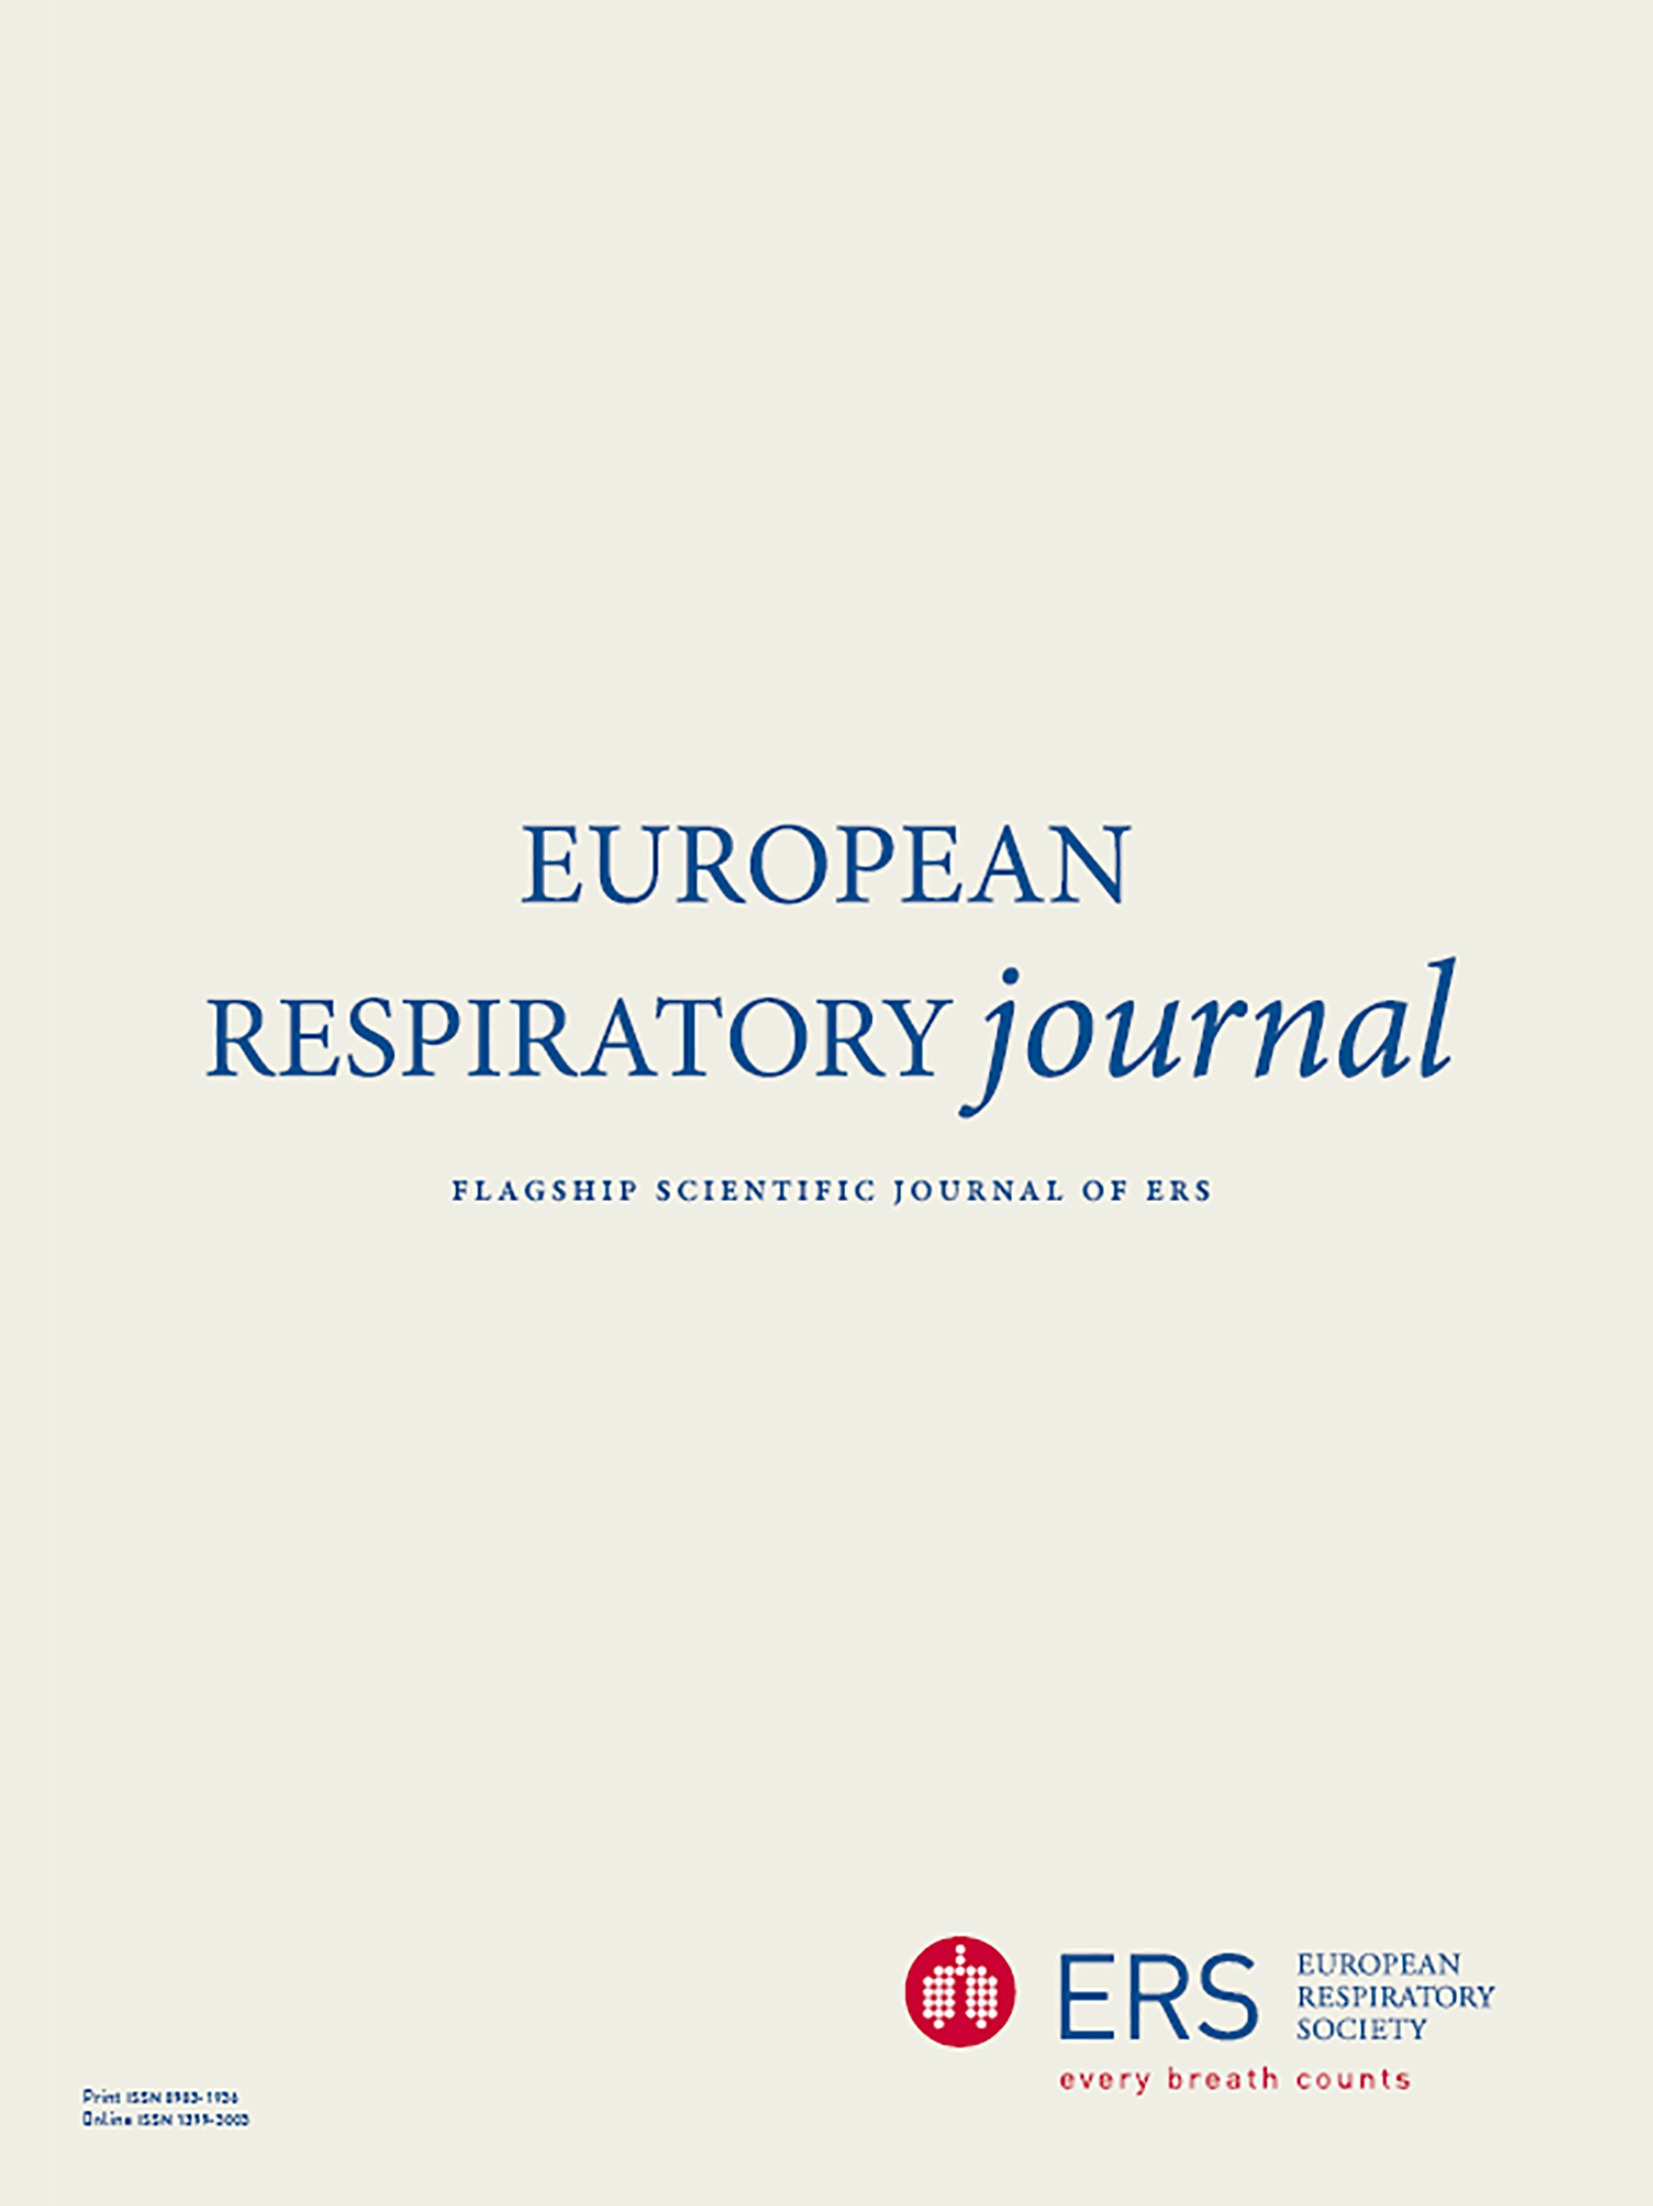 Guiding pragmatic treatment choices for rifampicin-resistant tuberculosis in the absence of second-line drug susceptibility testing